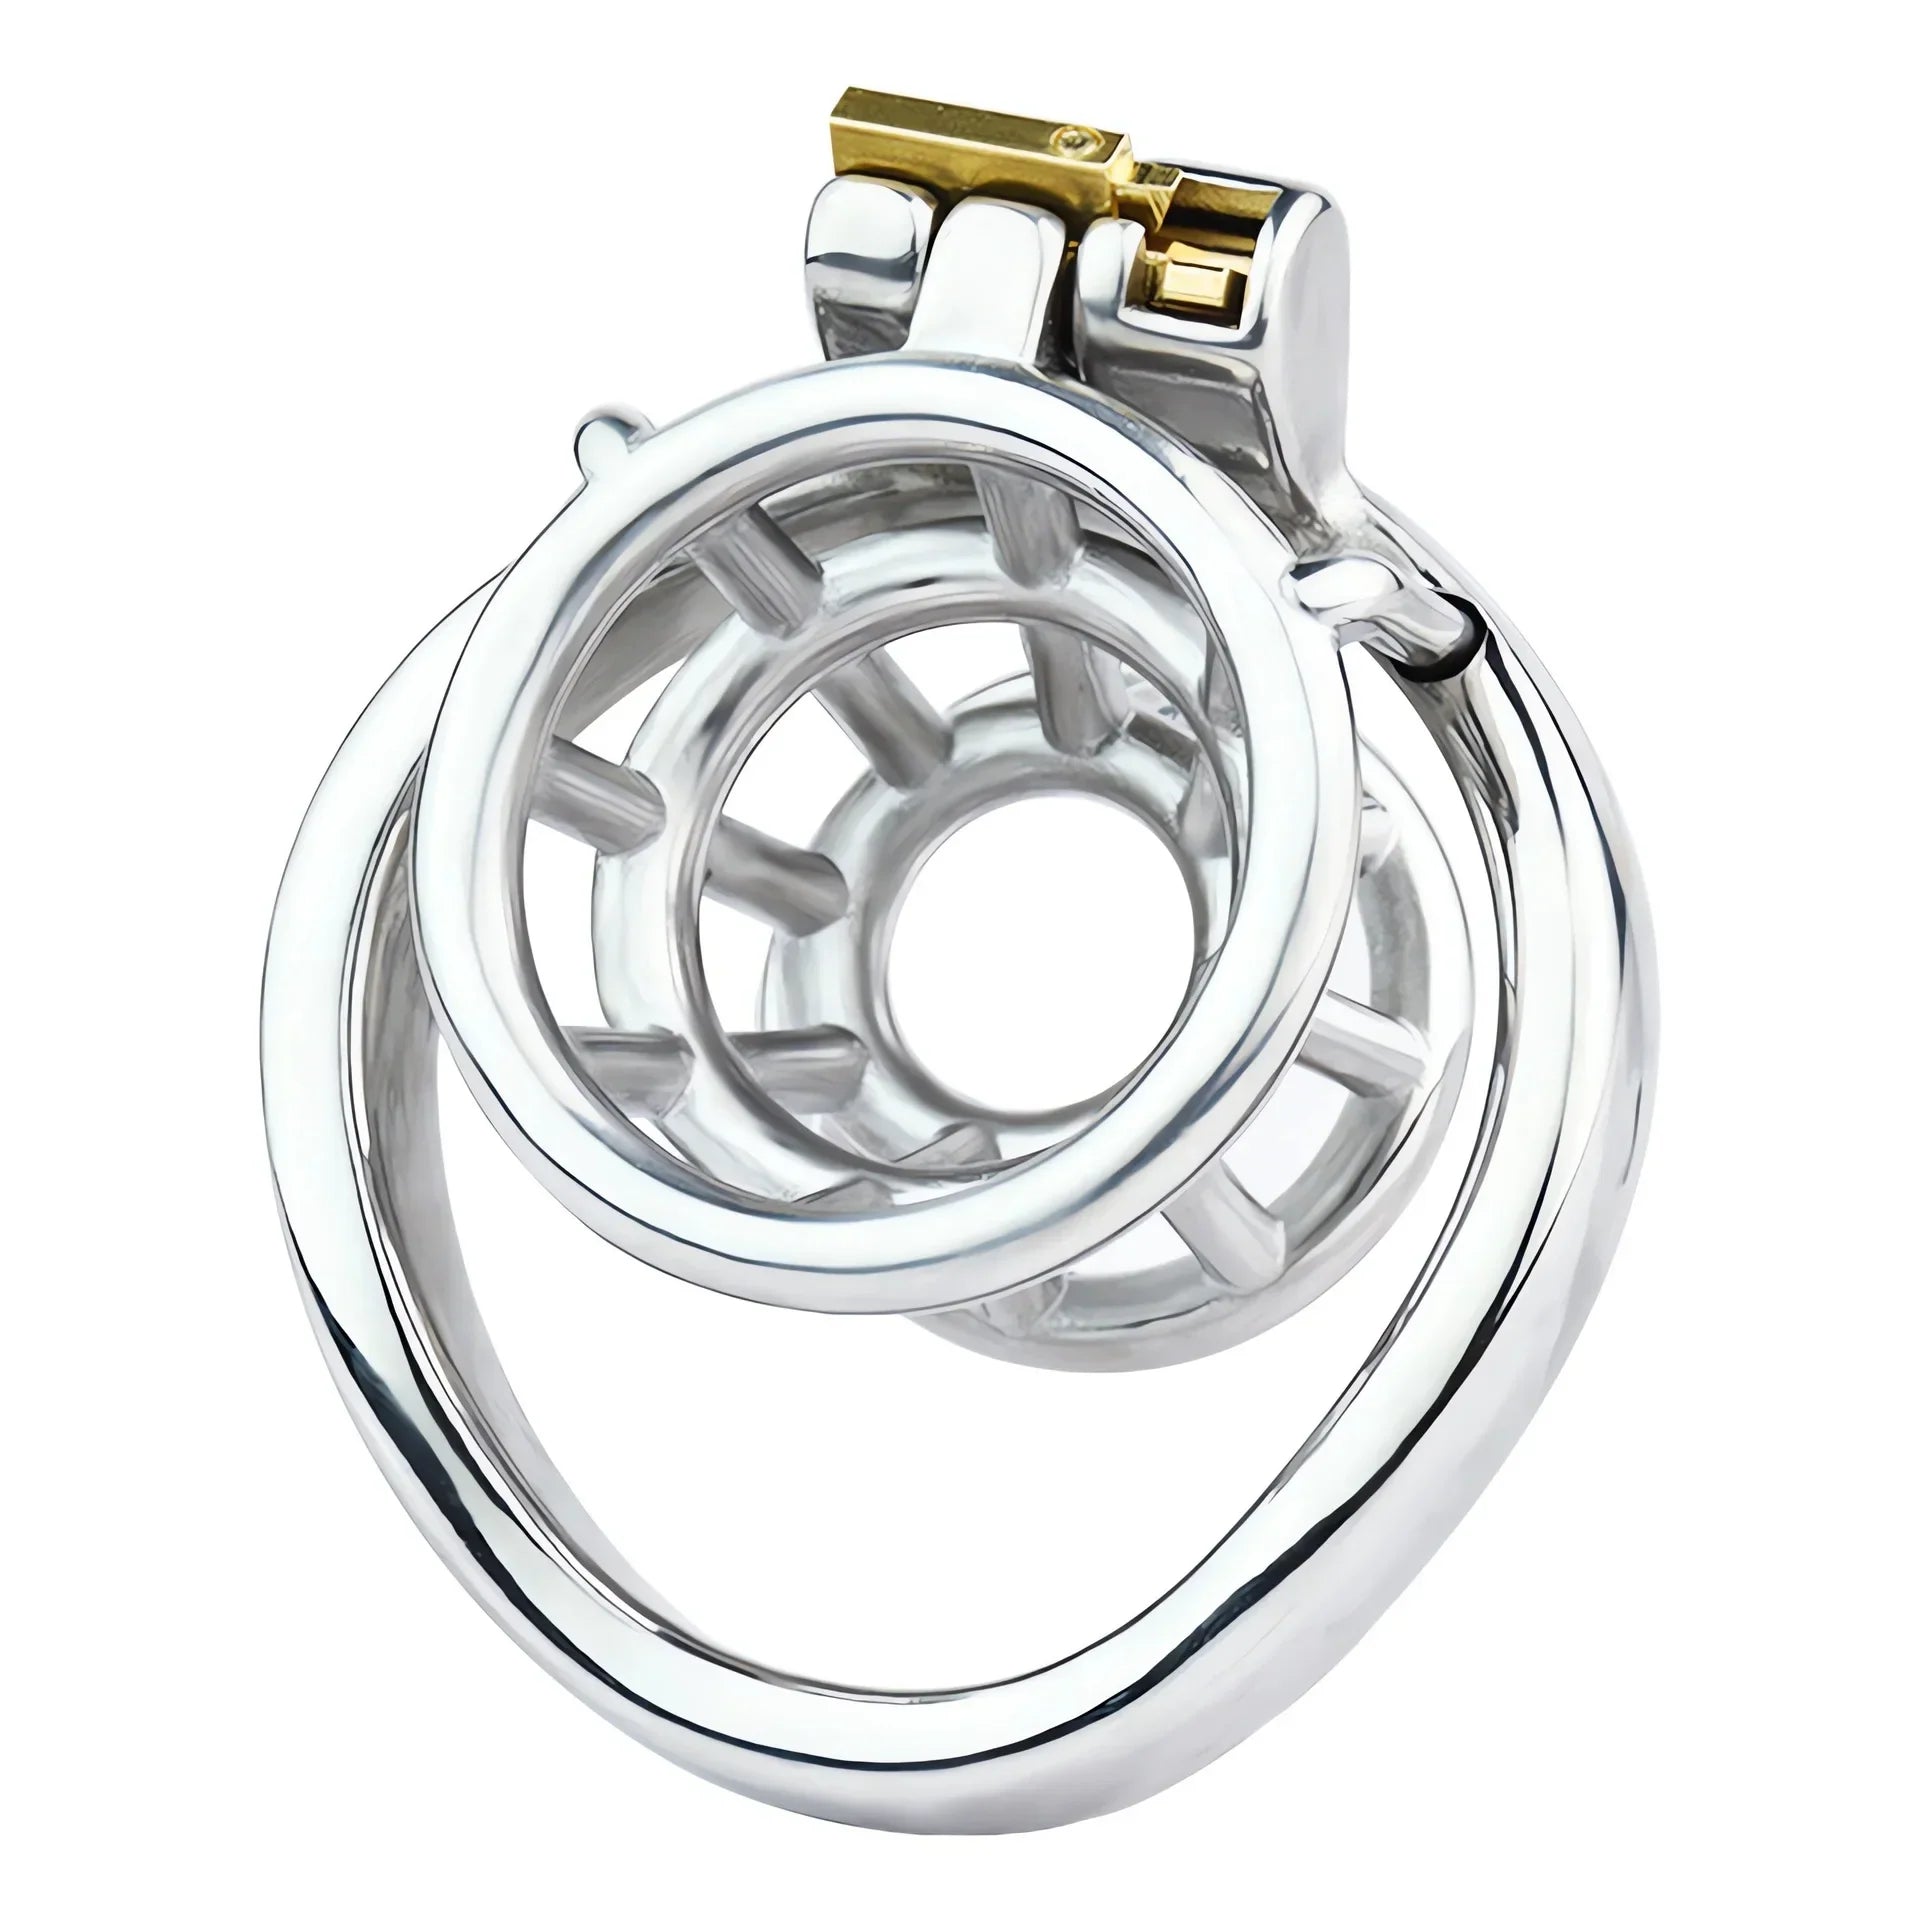 Small Size Chastity Cage for Men in 304 Stainless Steel –  invertedchastitycage